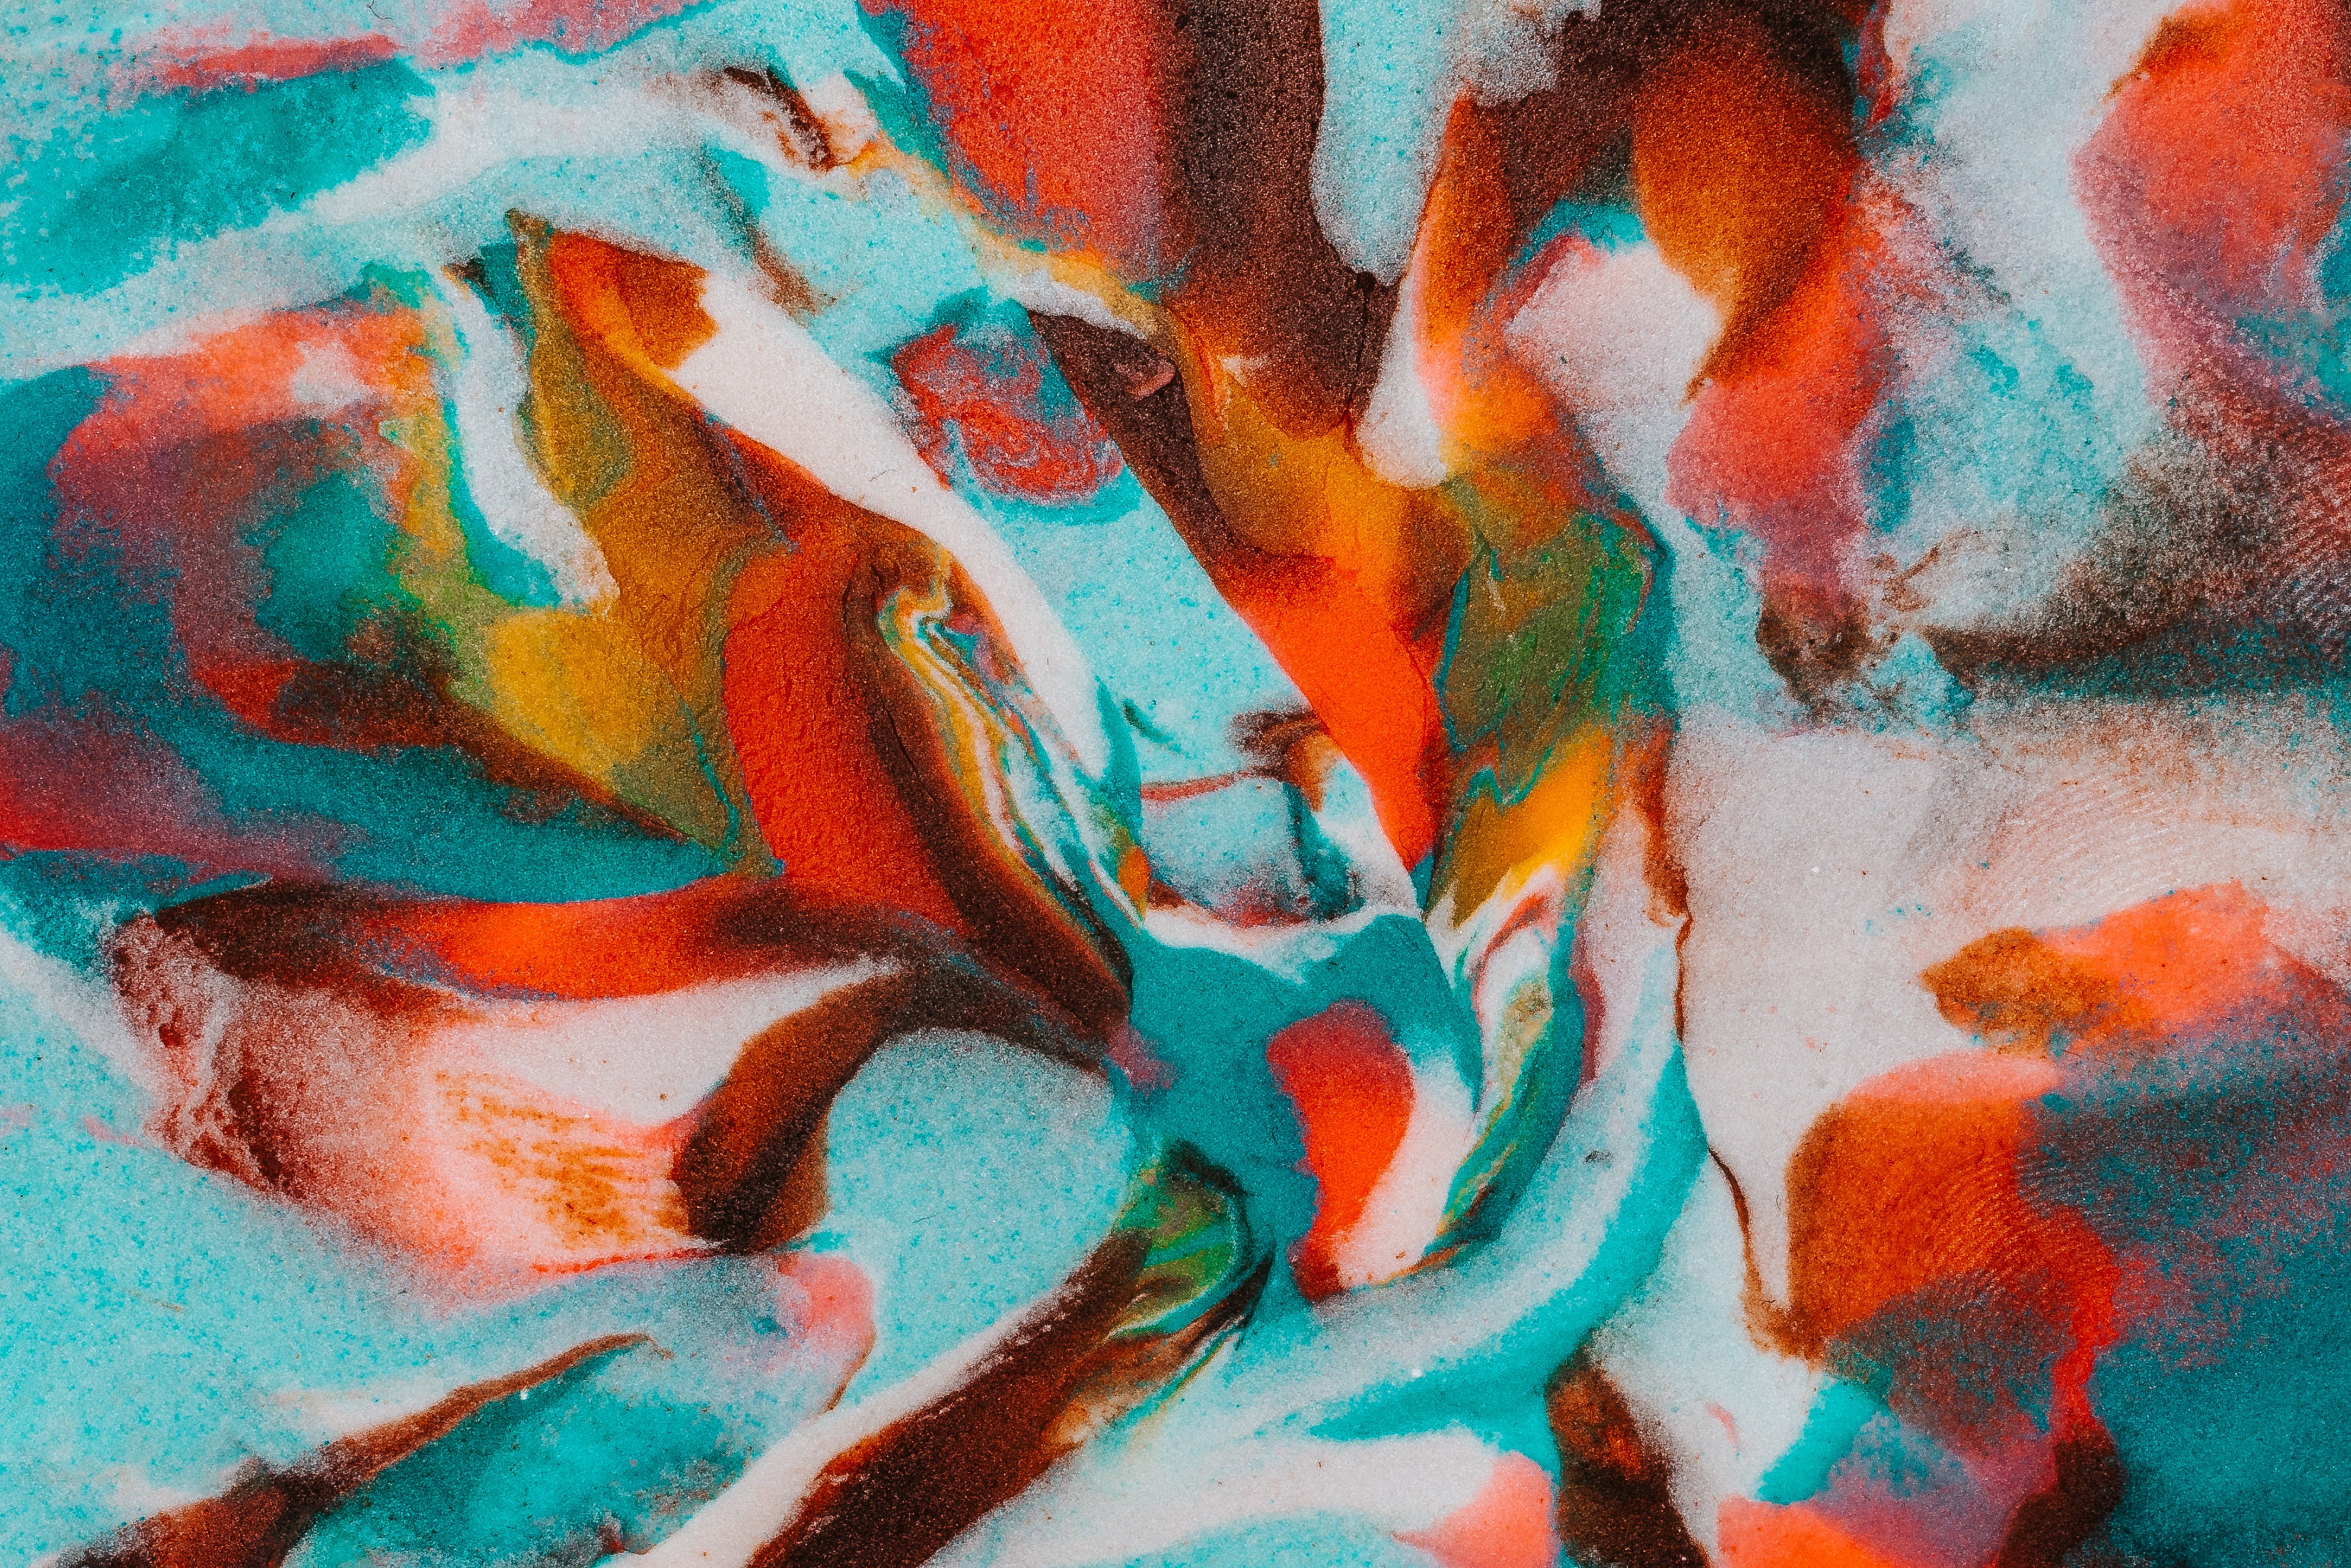 motley, abstract, multicolored, paint, colors, color, stains, spots Desktop home screen Wallpaper